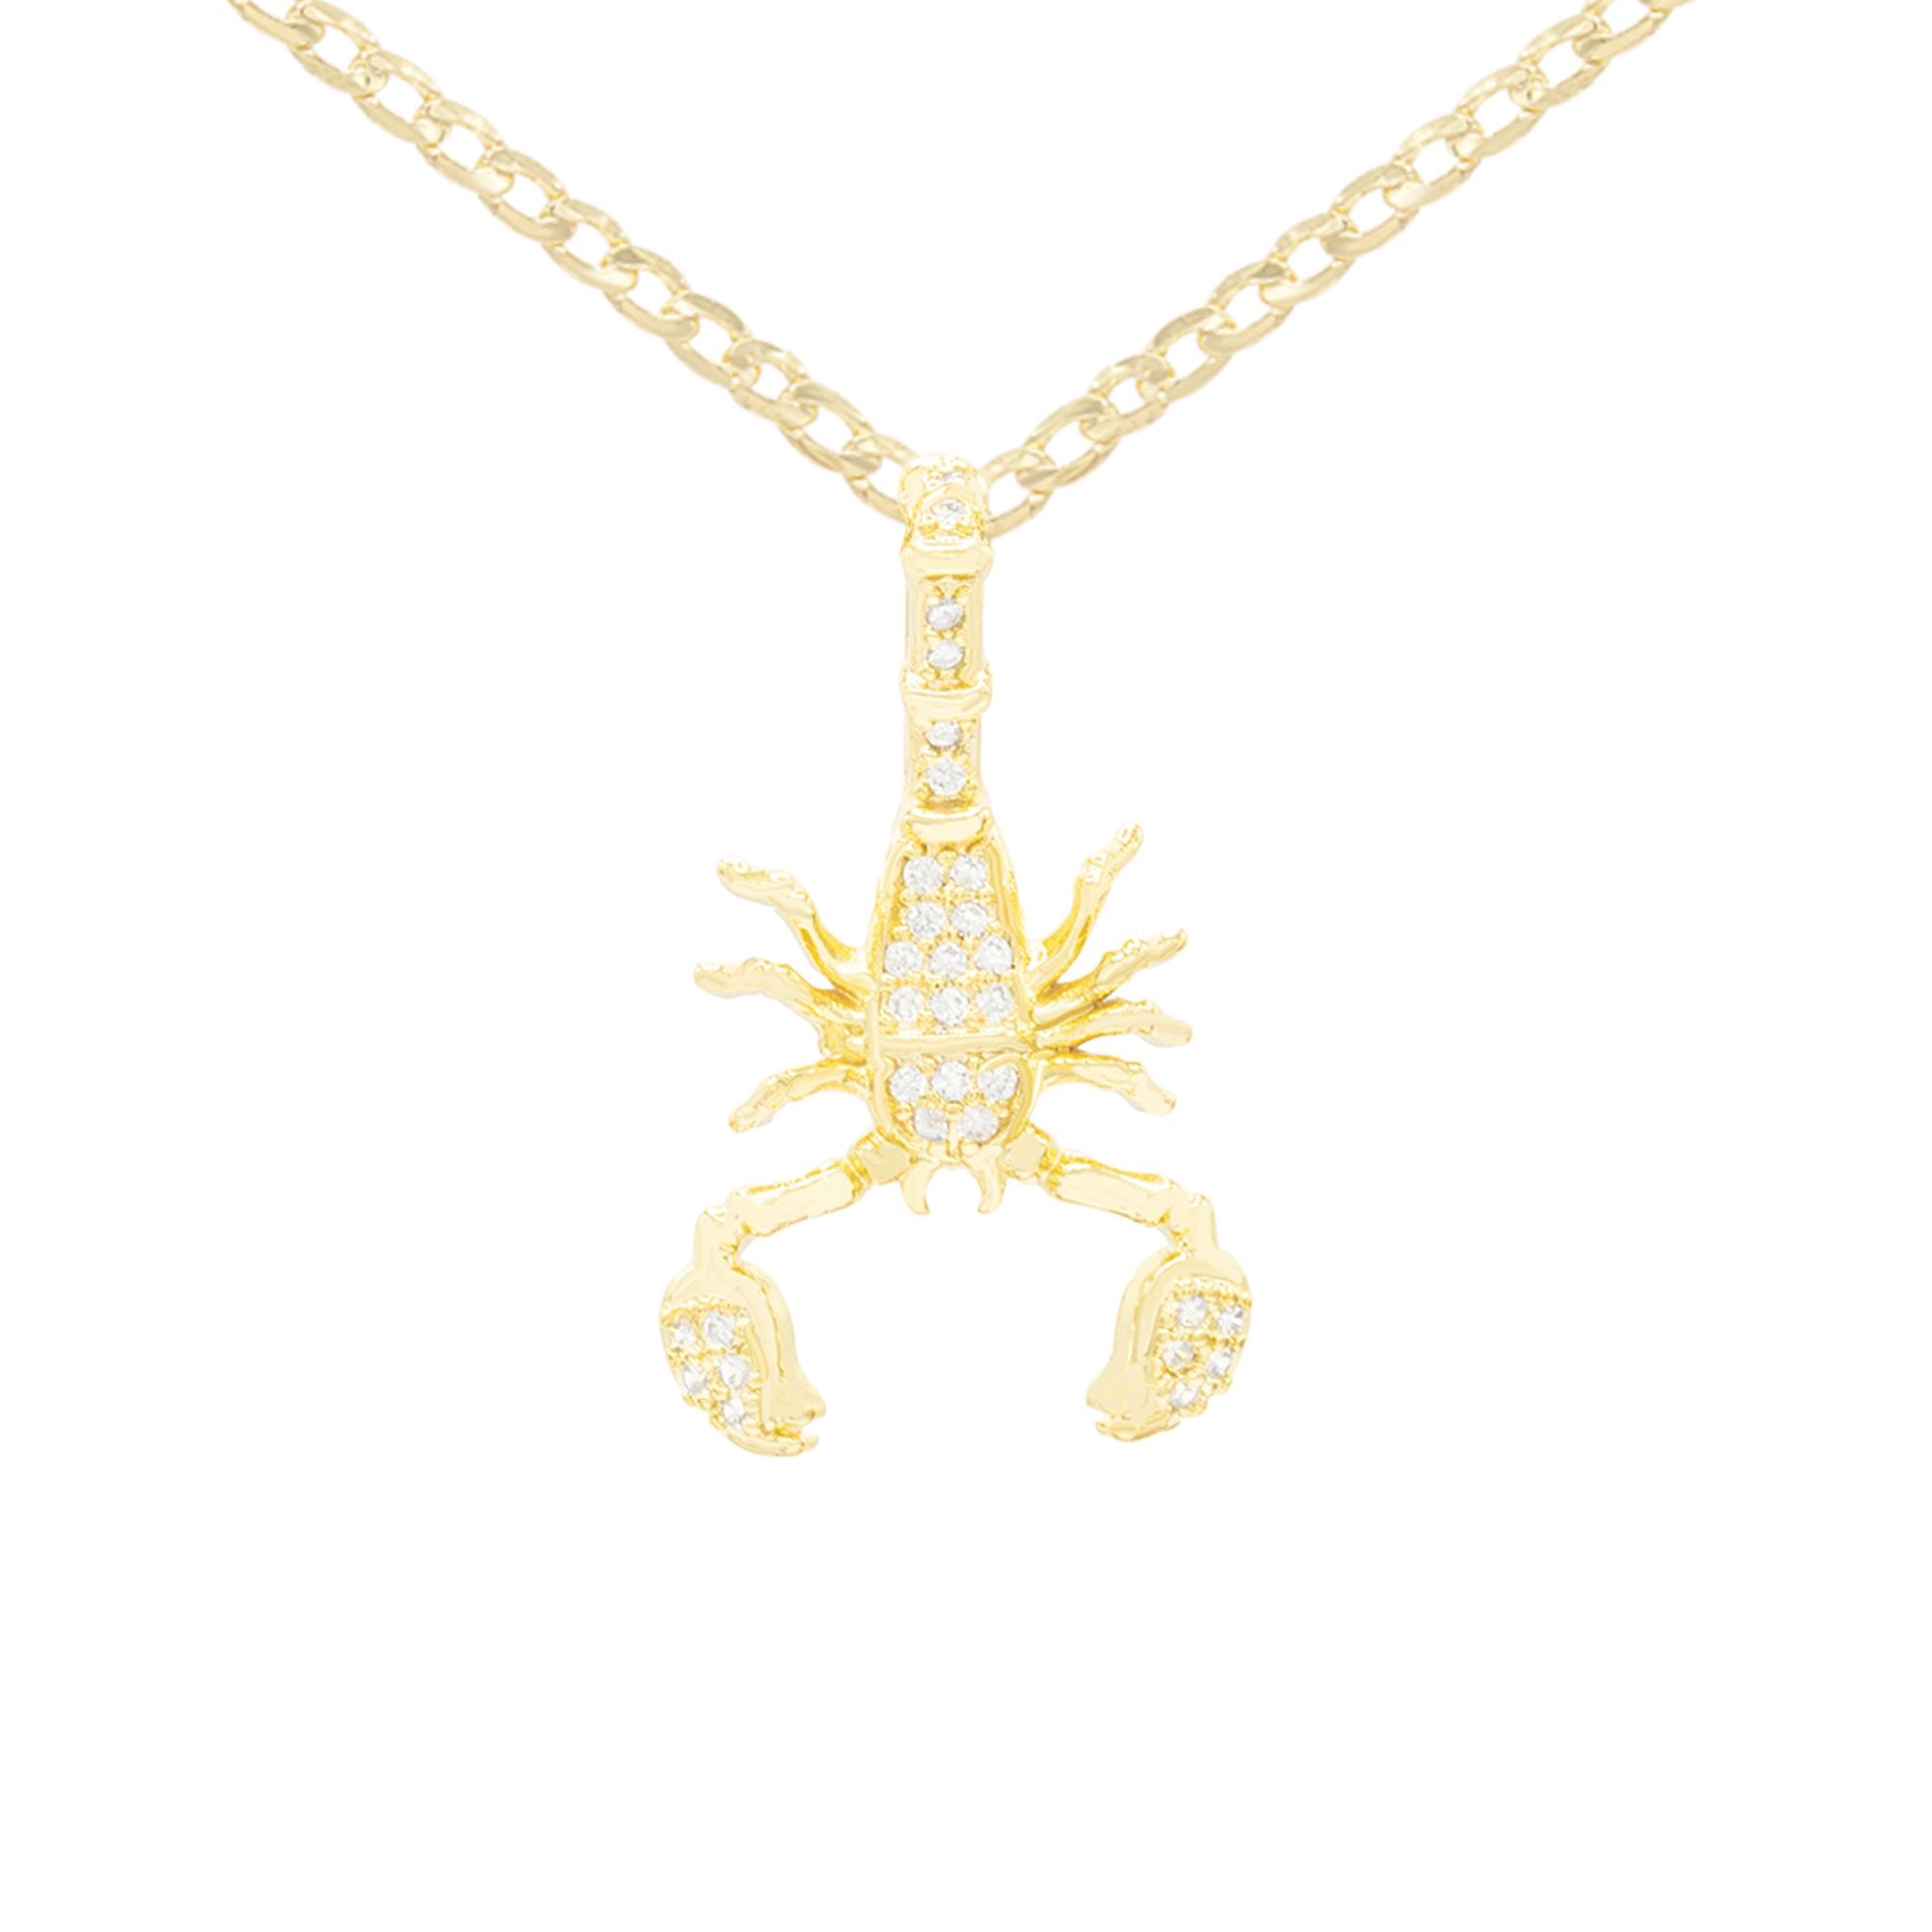 Scorpion Cubic Zirconia Pendant With Necklace Set 14K Gold Filled